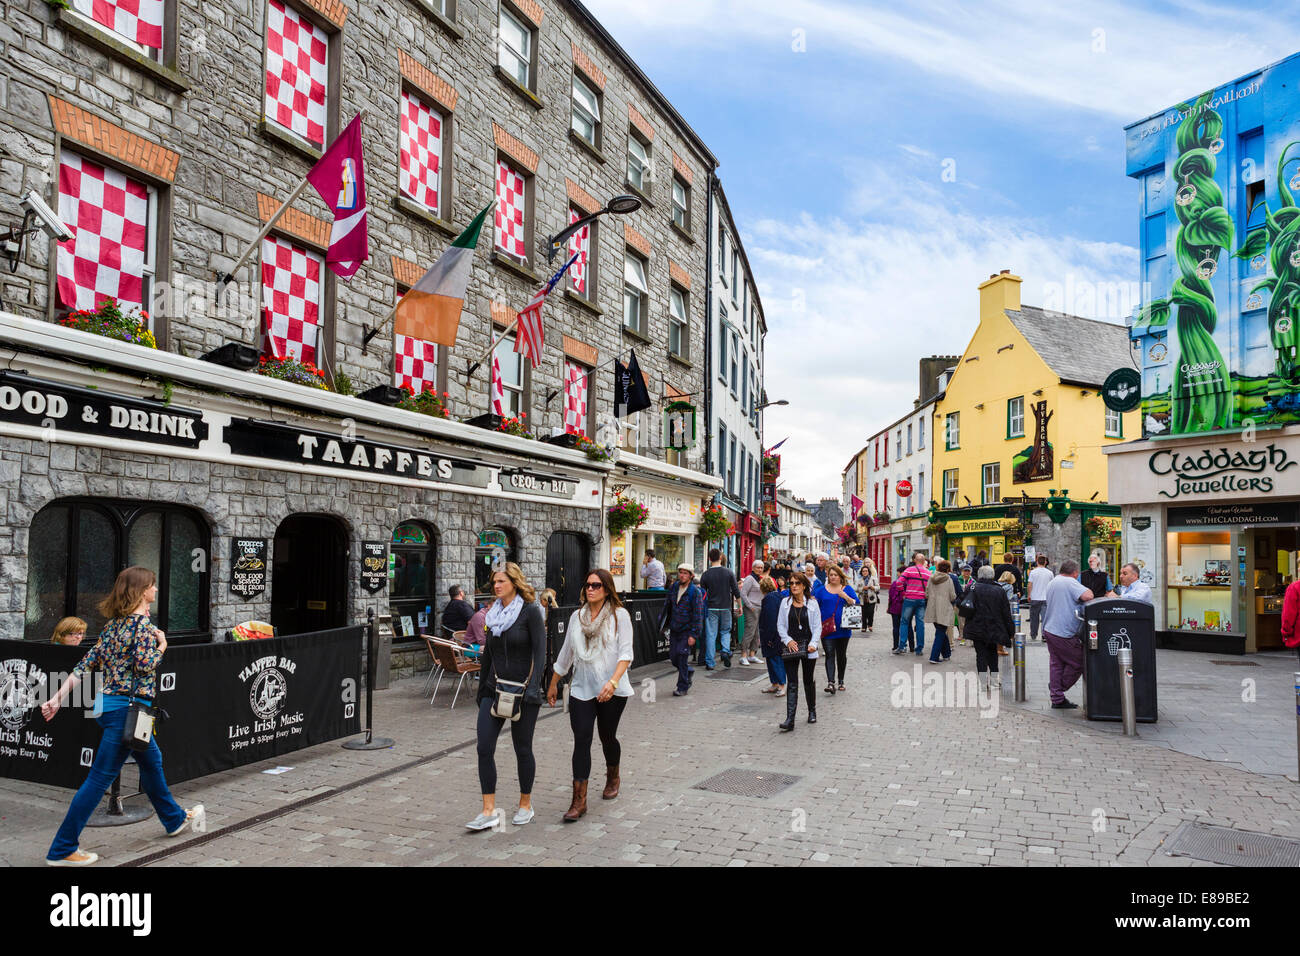 Pubs, restaurants and shops on Shop Street in Galway City Latin Quarter, County Galway, Republic of Ireland Stock Photo